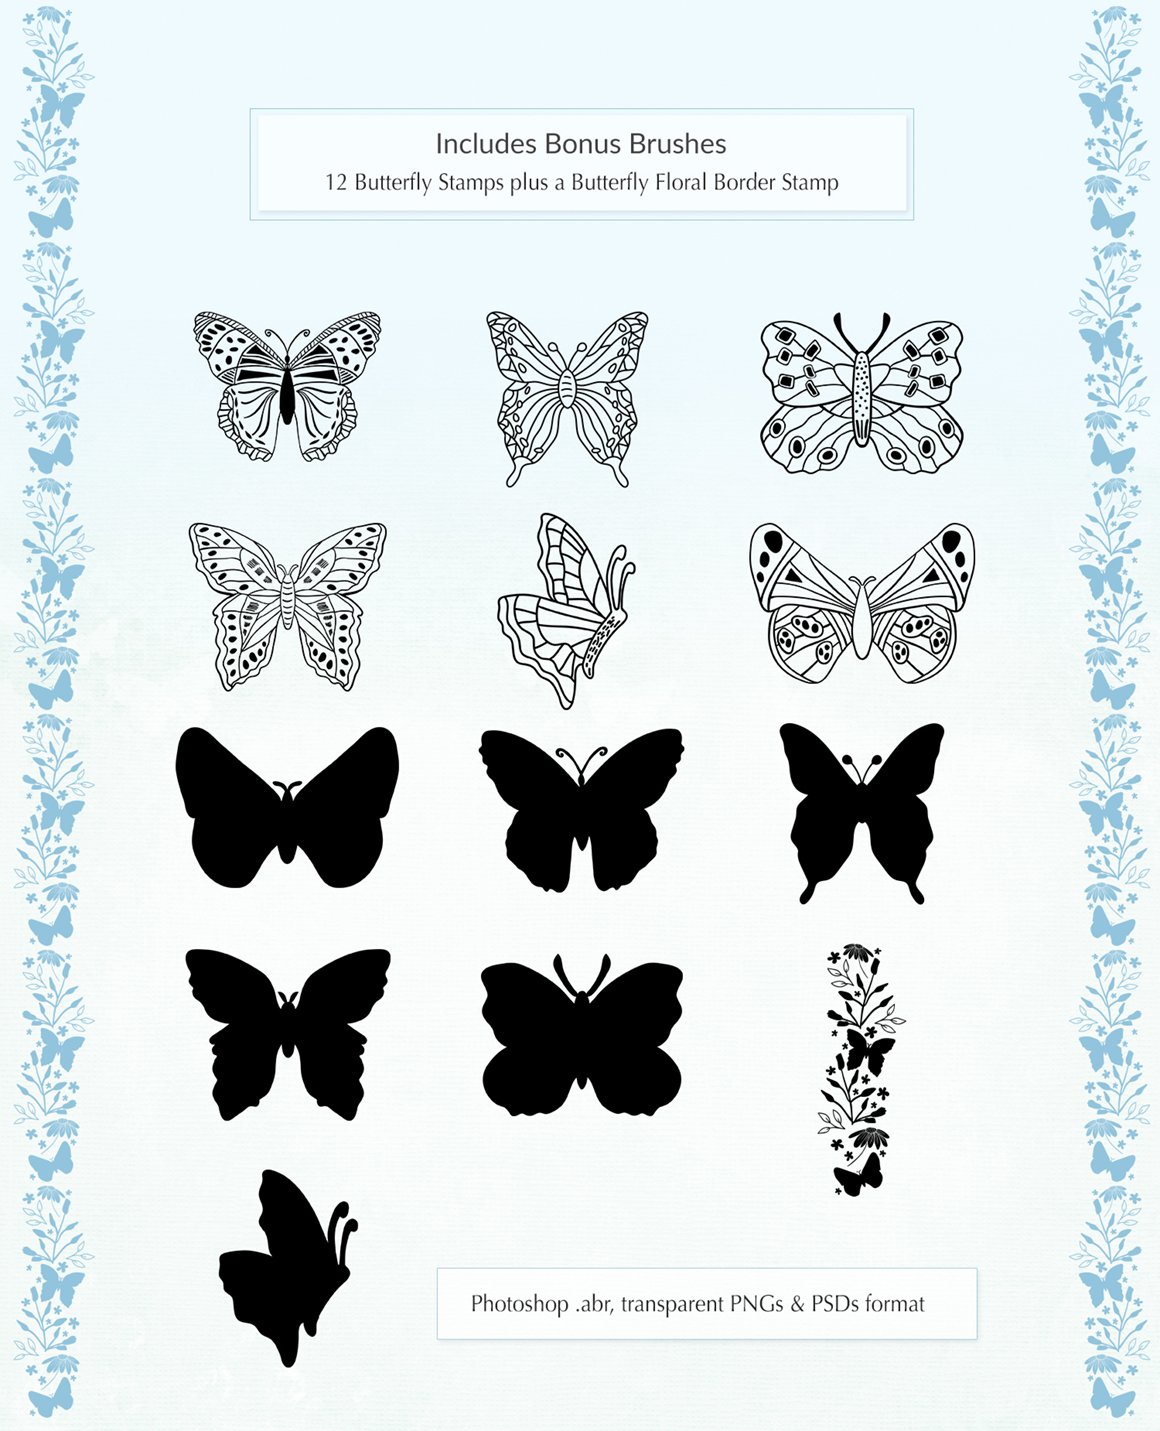 Butterfly Patterns, Papers and Brushes Set